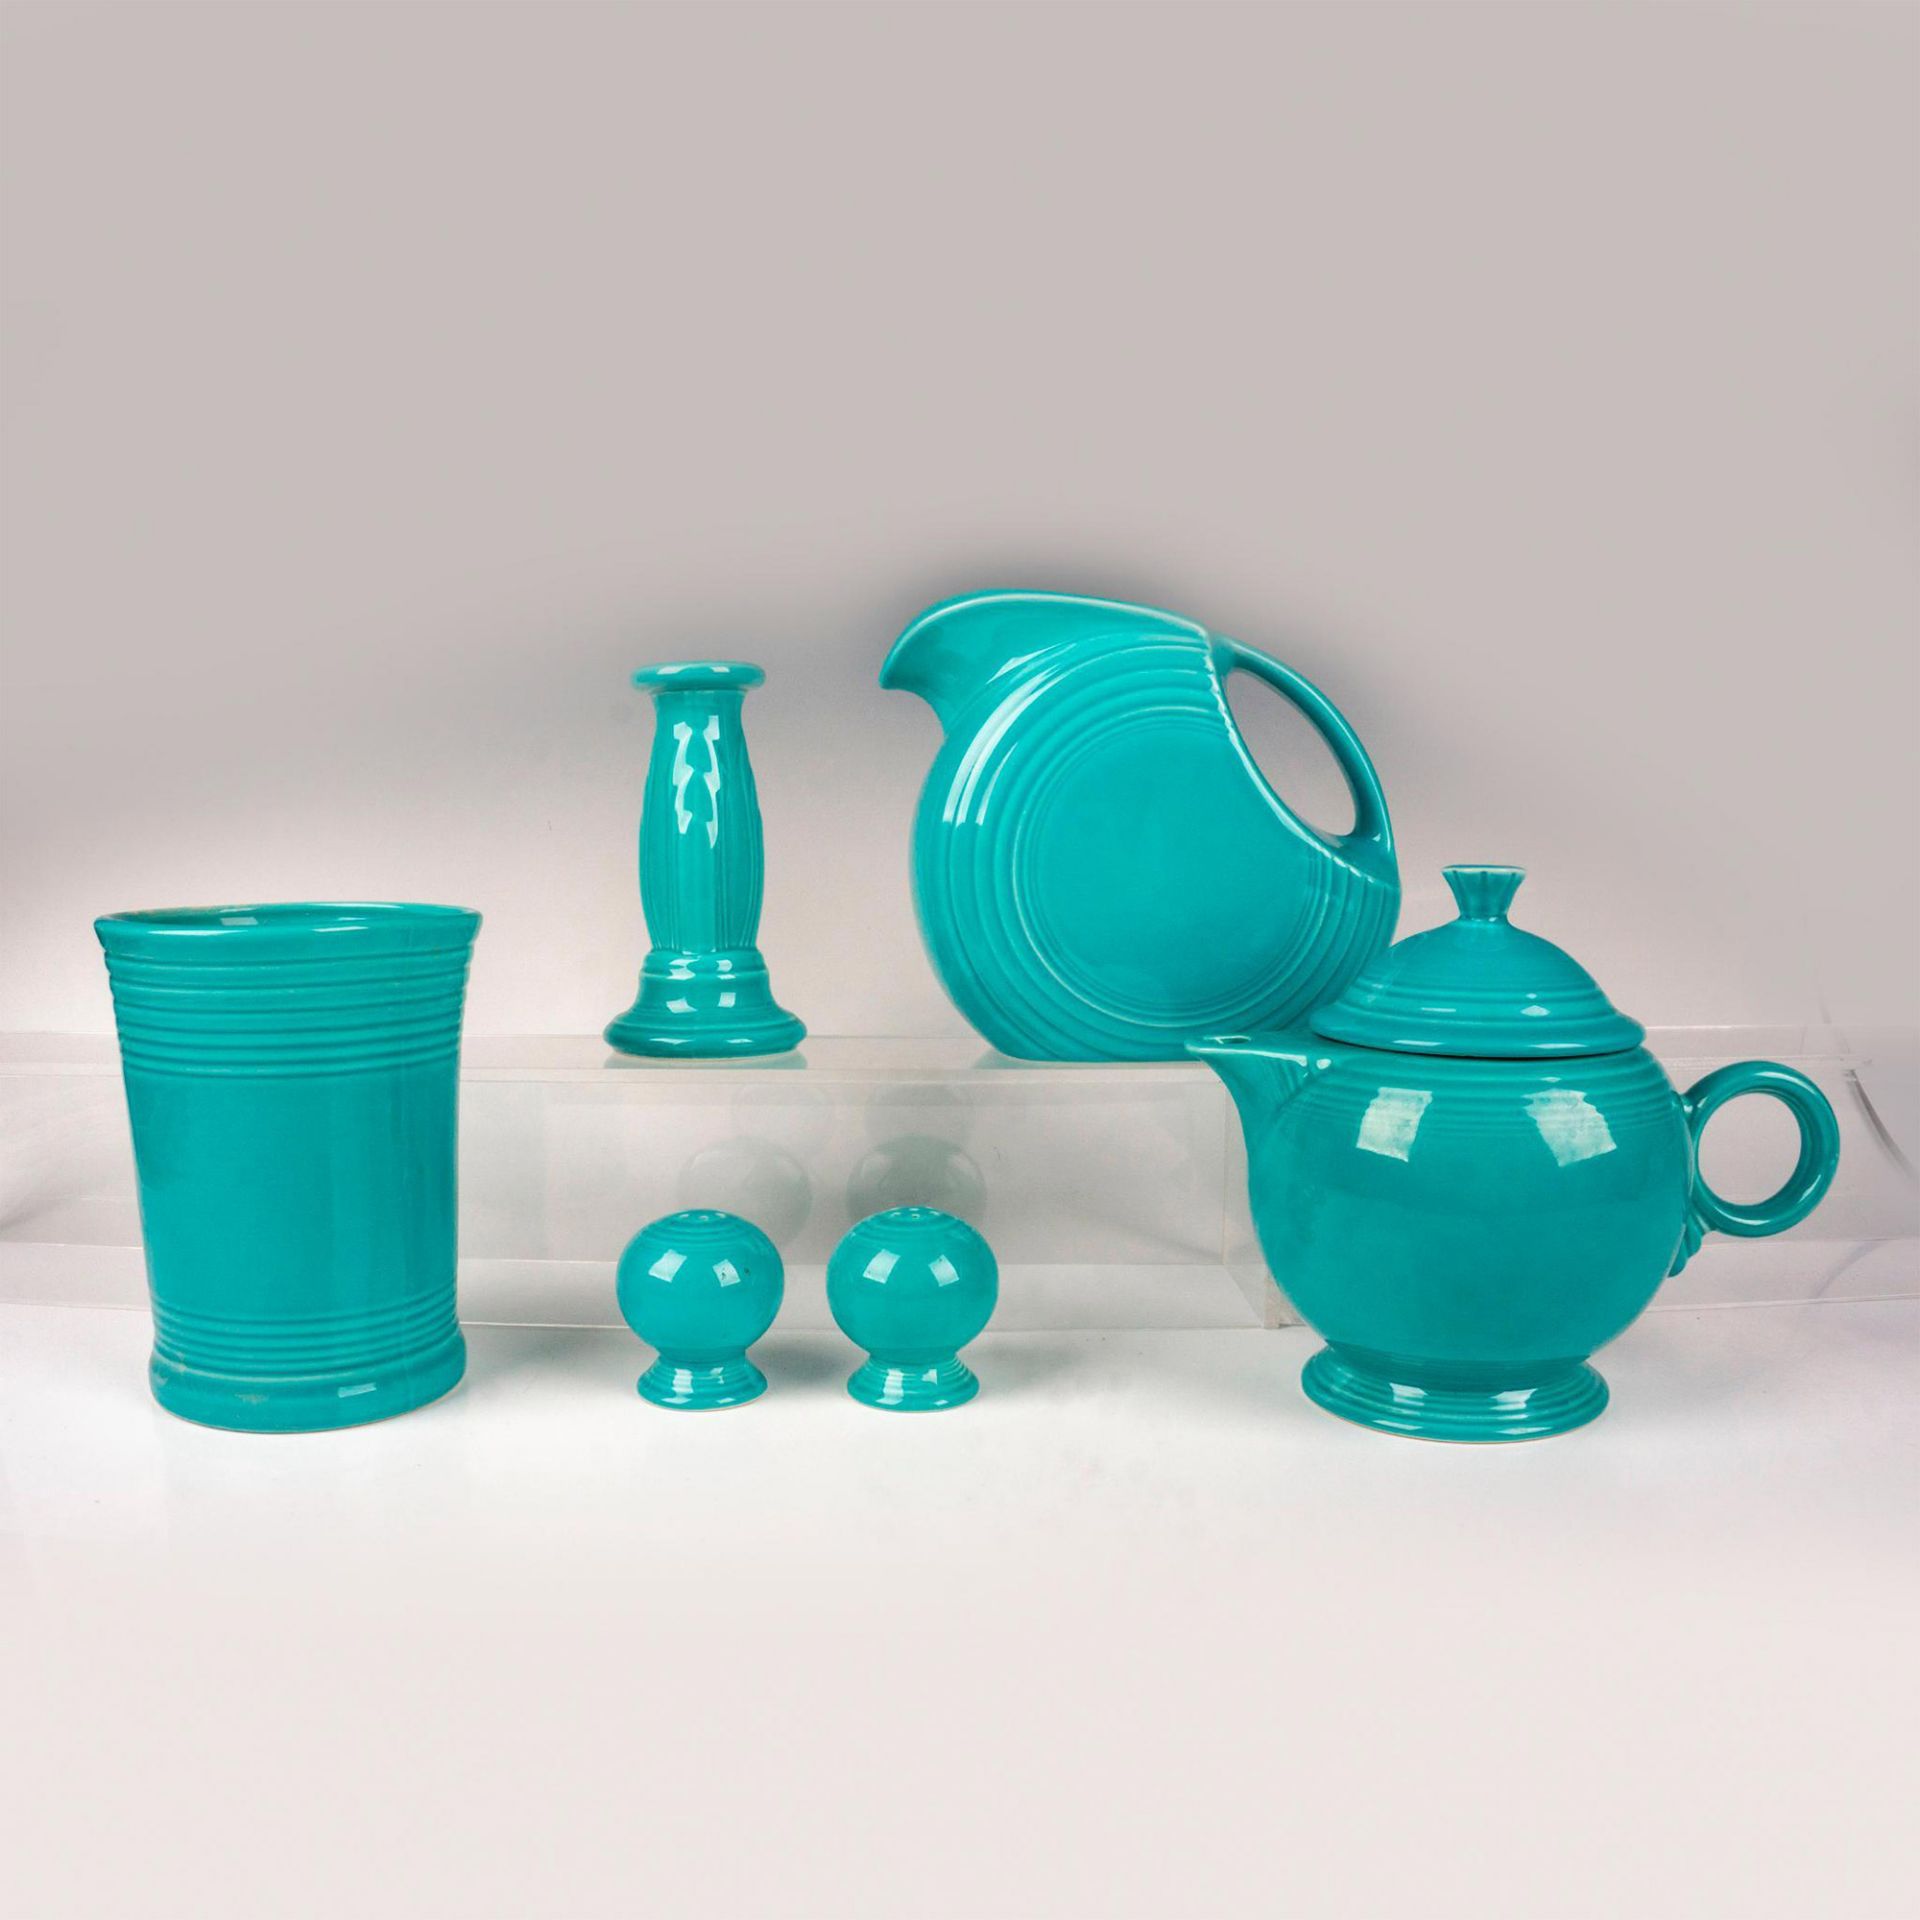 6pc Fiesta Table Ware Pottery Grouping, Turquoise-Colored